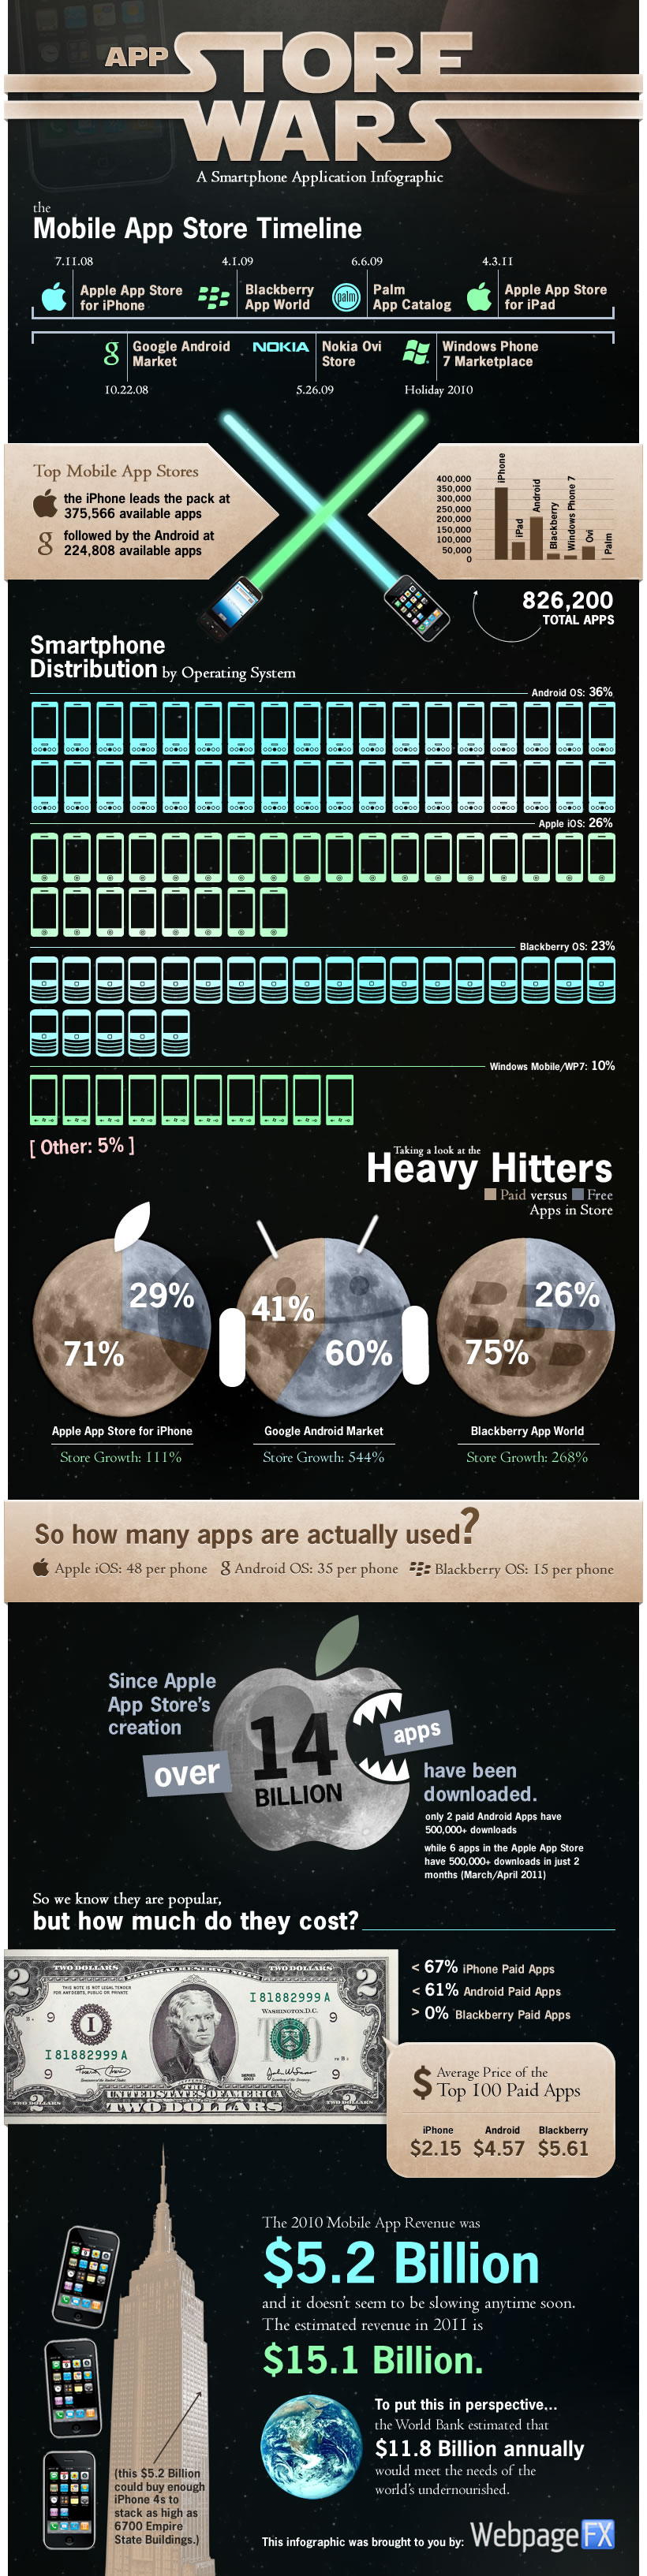 App Store Wars: The Mobile App Store Timeline [Infographic]